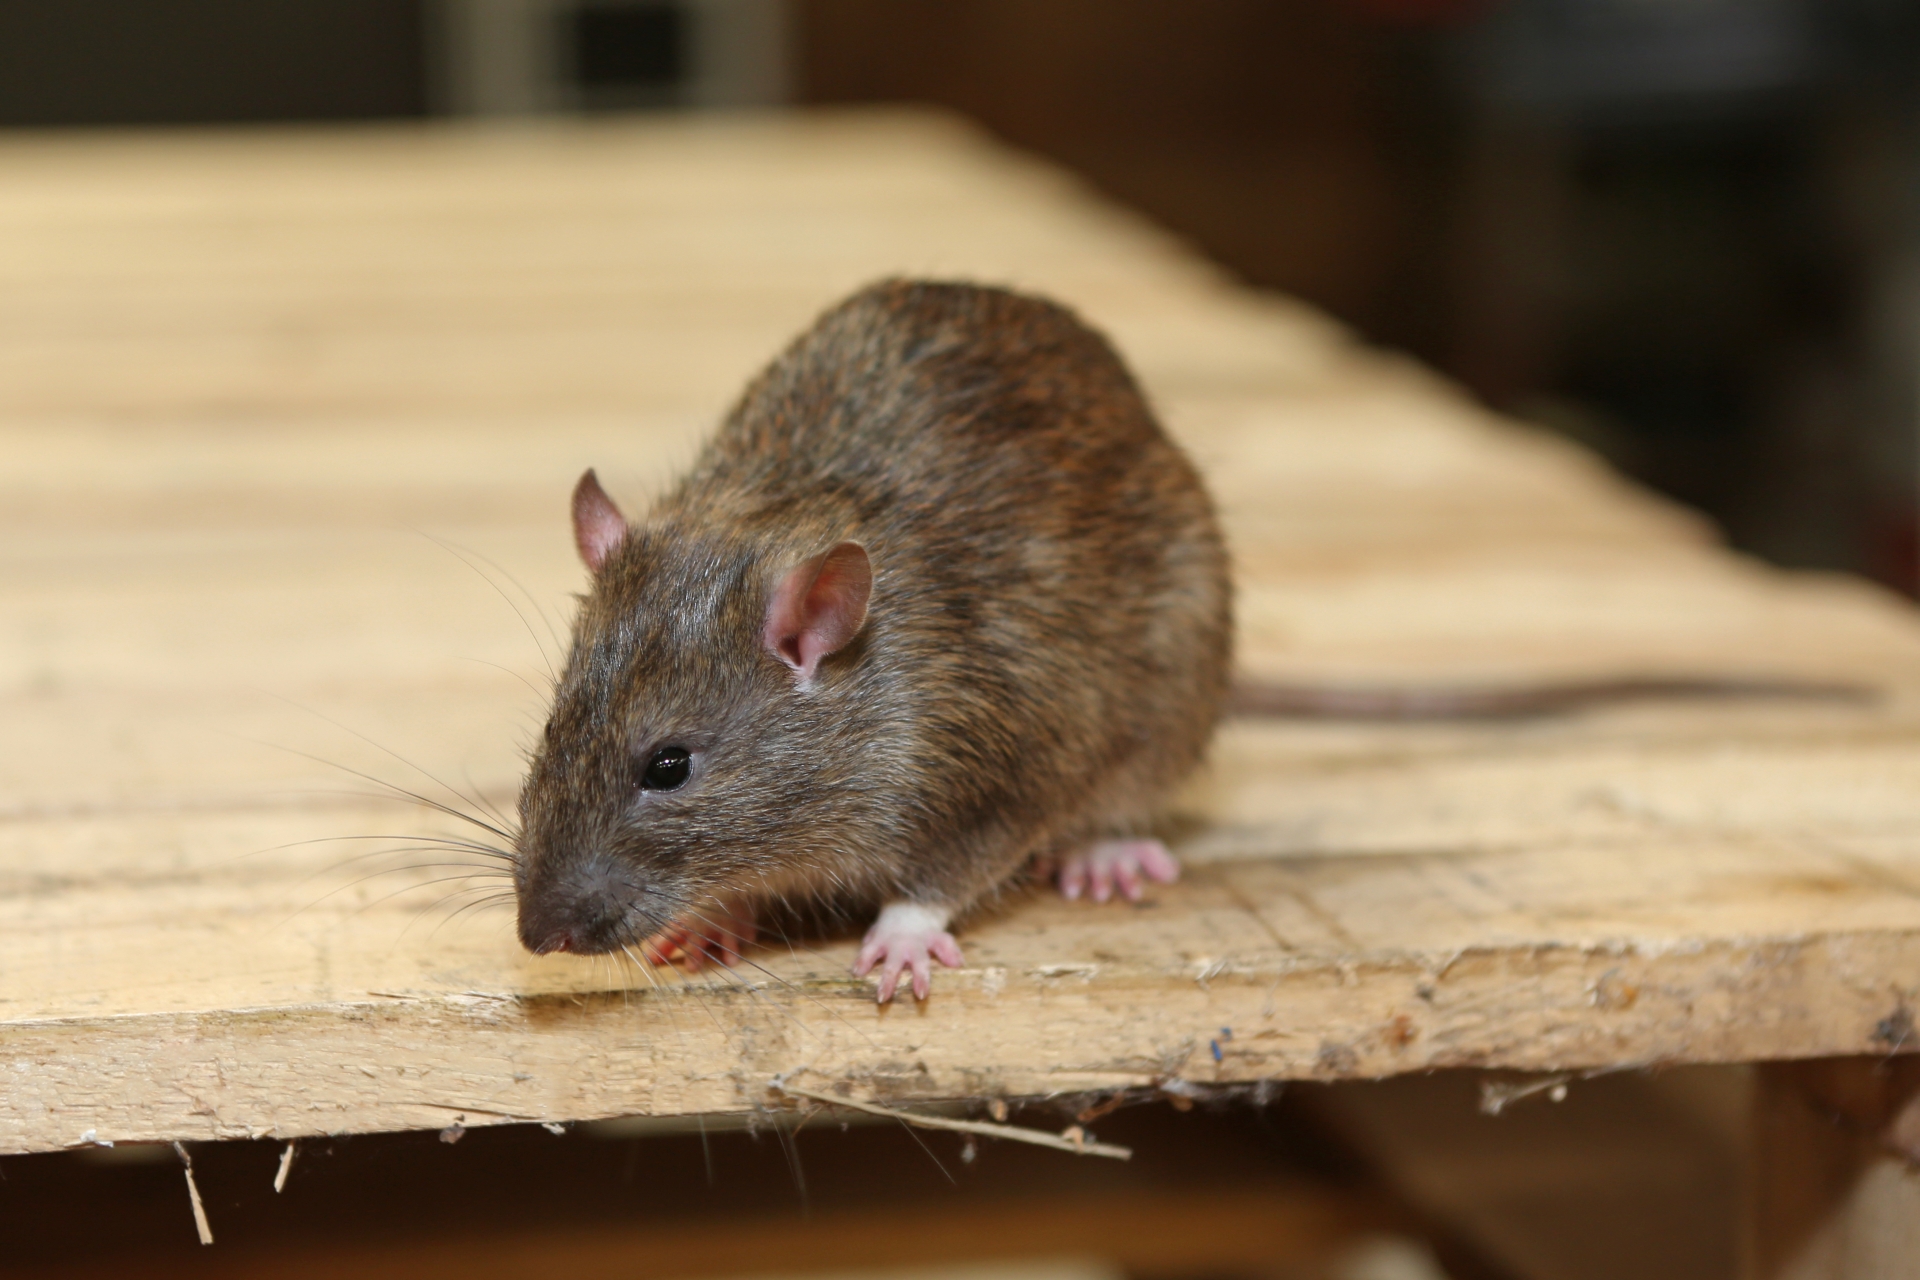 Rat Control, Pest Control in Bromley, Bickley, Downham, BR1. Call Now 020 8166 9746